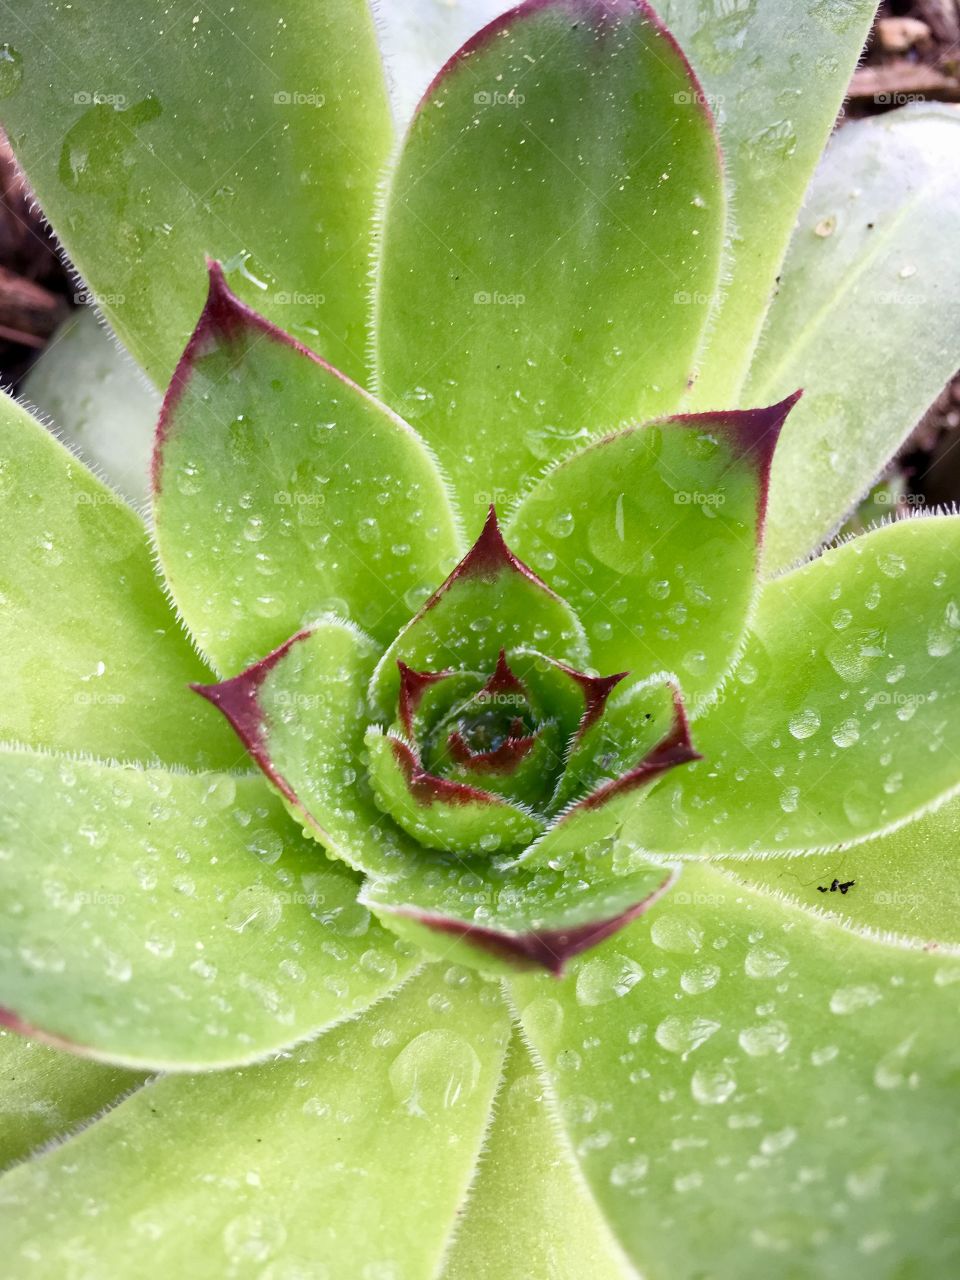 Raindrops on my hens and chicks